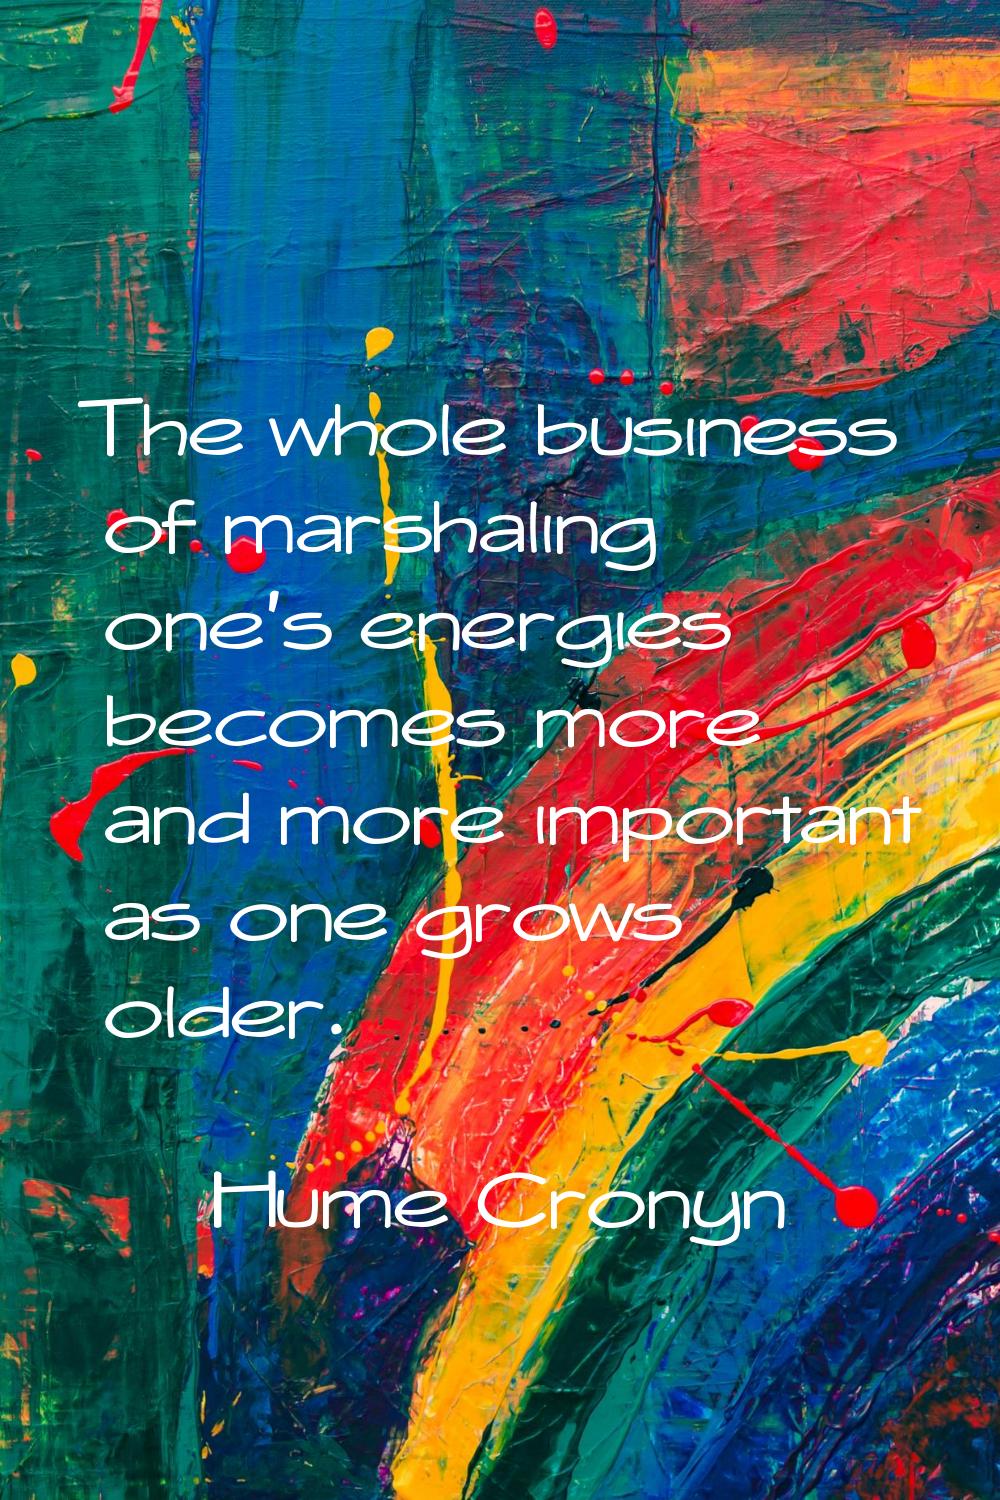 The whole business of marshaling one's energies becomes more and more important as one grows older.